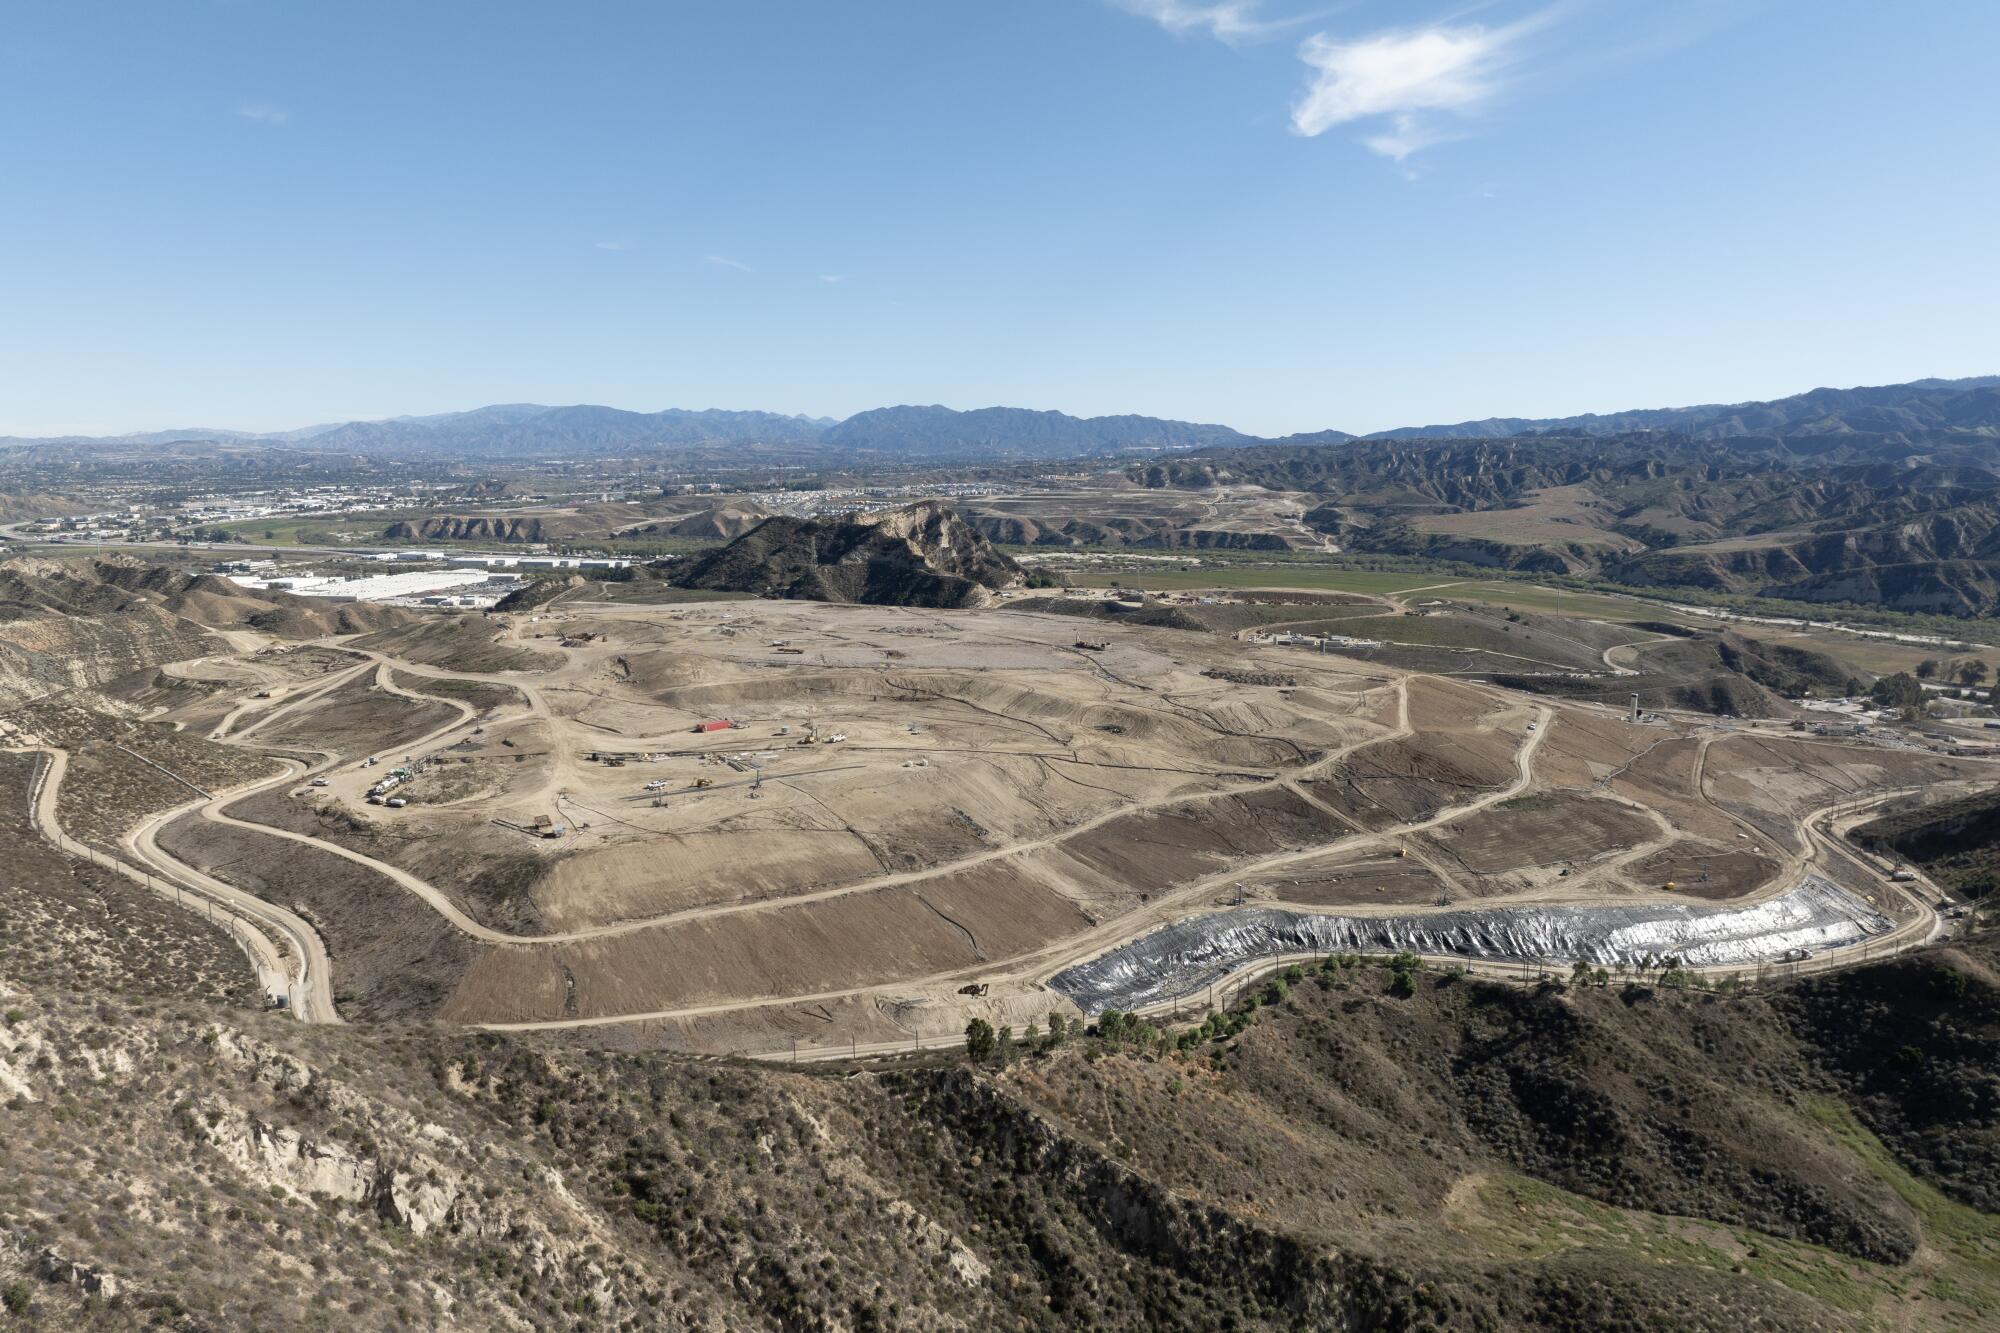 An aerial view of  Chiquita Canyon Landfill in Castaic.